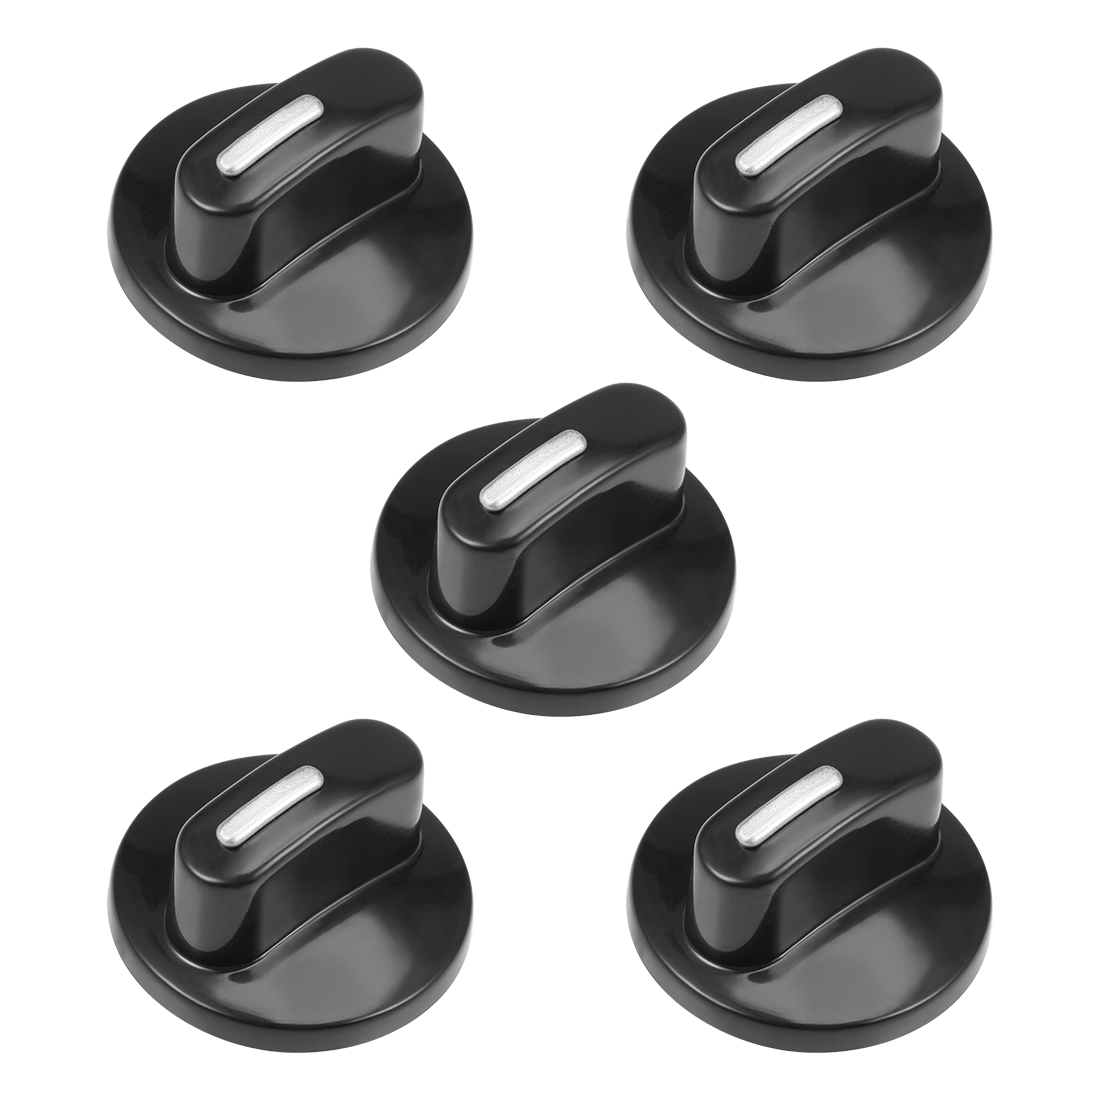 uxcell 5pcs Timer Knobs Range Replacement Knobs Time Control Knob Round Half Shaft for Electronic Microwave Oven Cooker